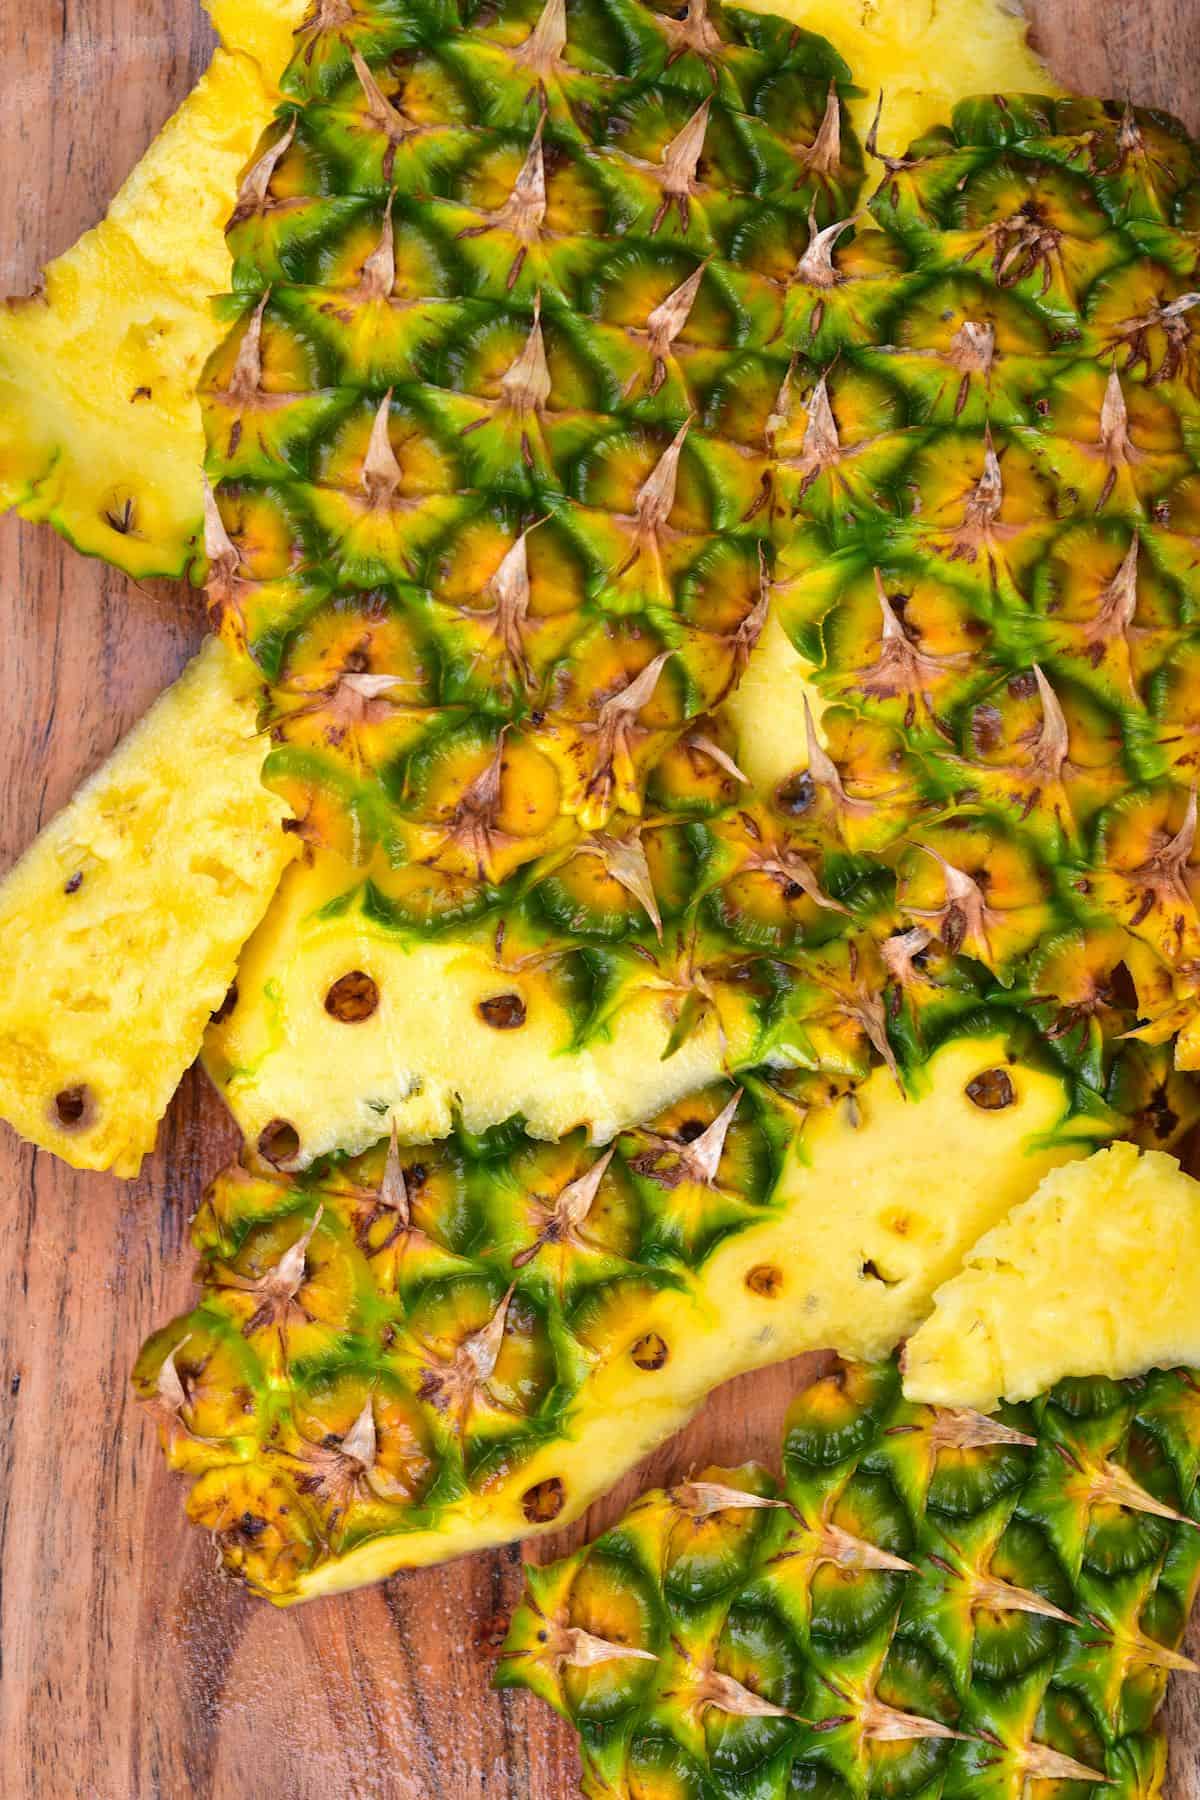 Pineapple peel on a wooden surface